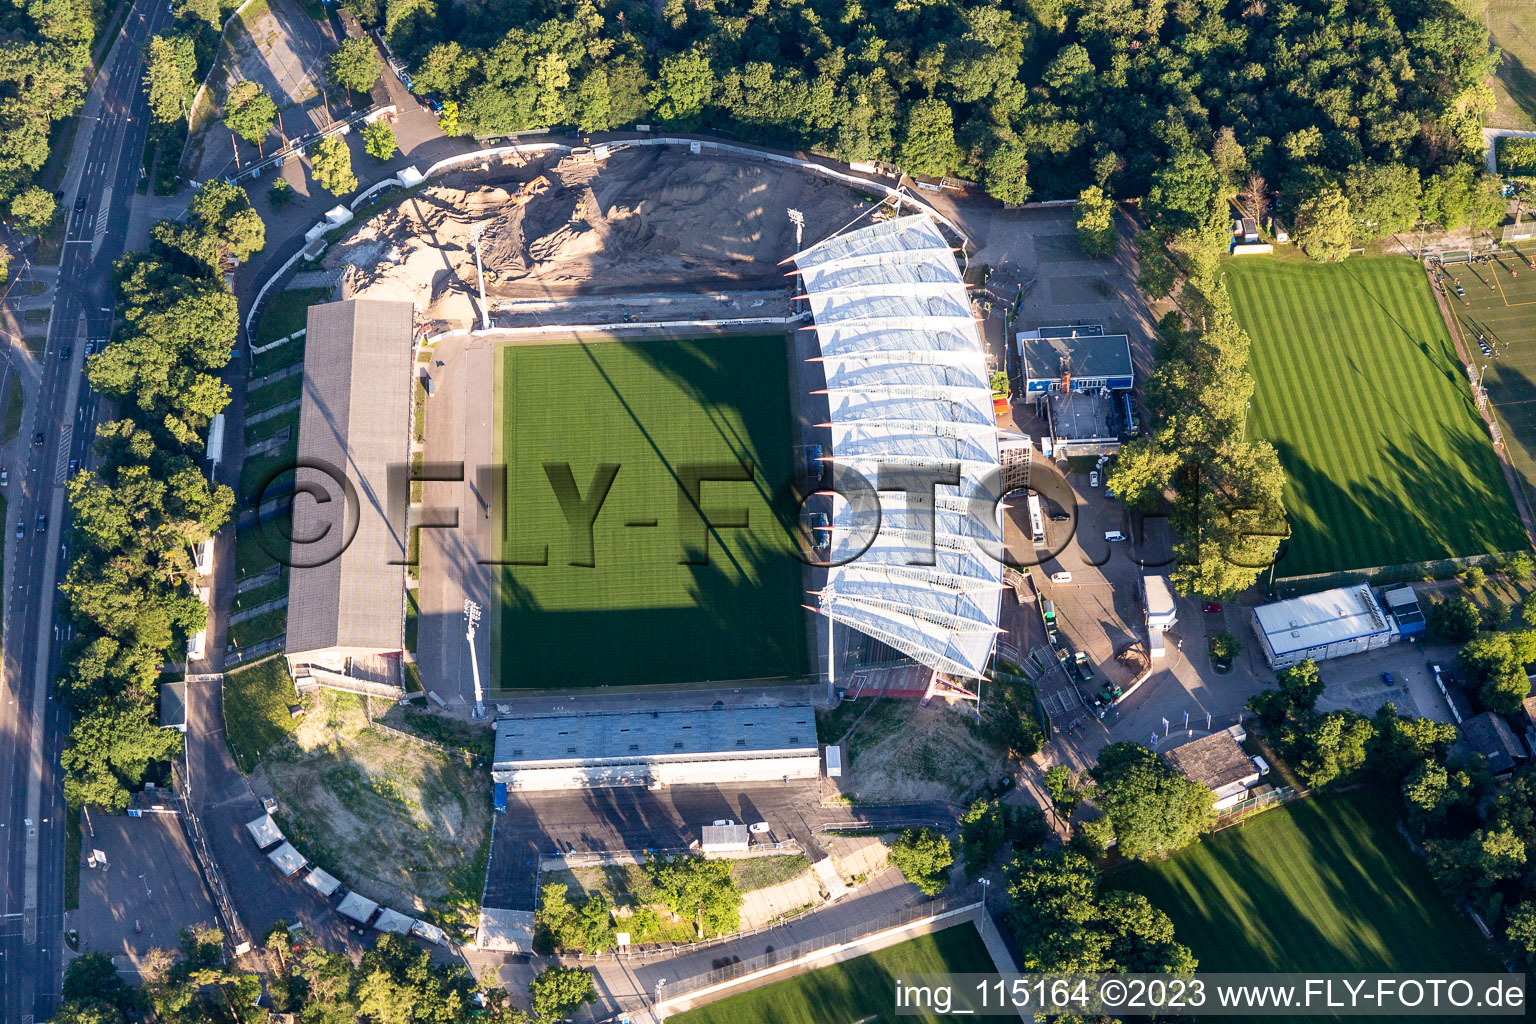 Oblique view of Extension and conversion site on the sports ground of the stadium "Wildparkstadion" of the KSC in Karlsruhe in the state Baden-Wurttemberg, Germany